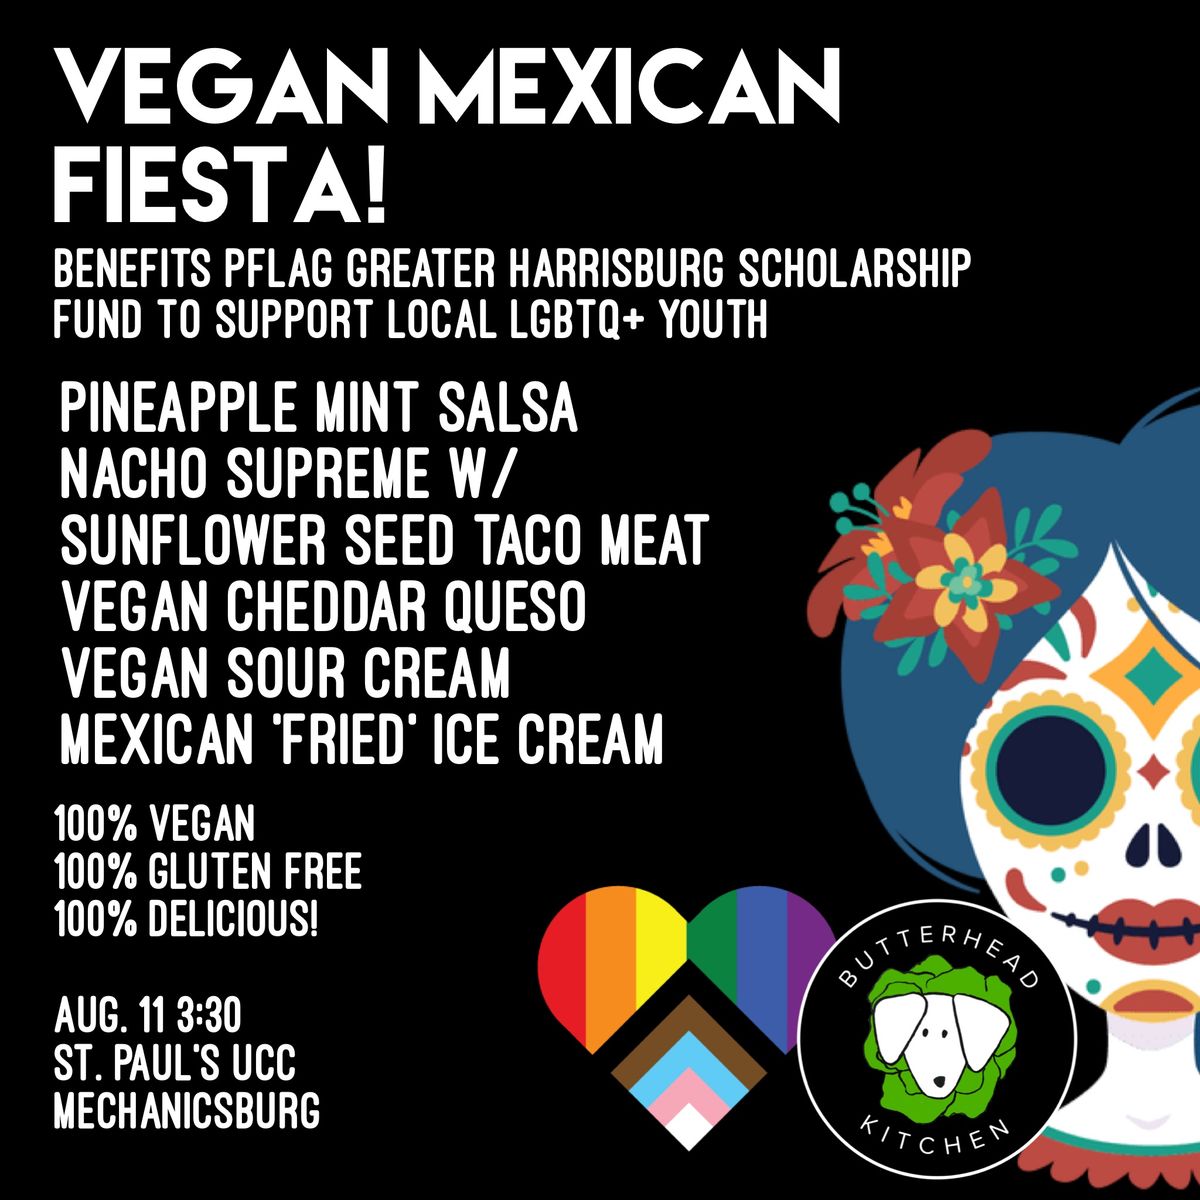 A Vegan Mexican Feista in Support of LGBTQ+ Youth 